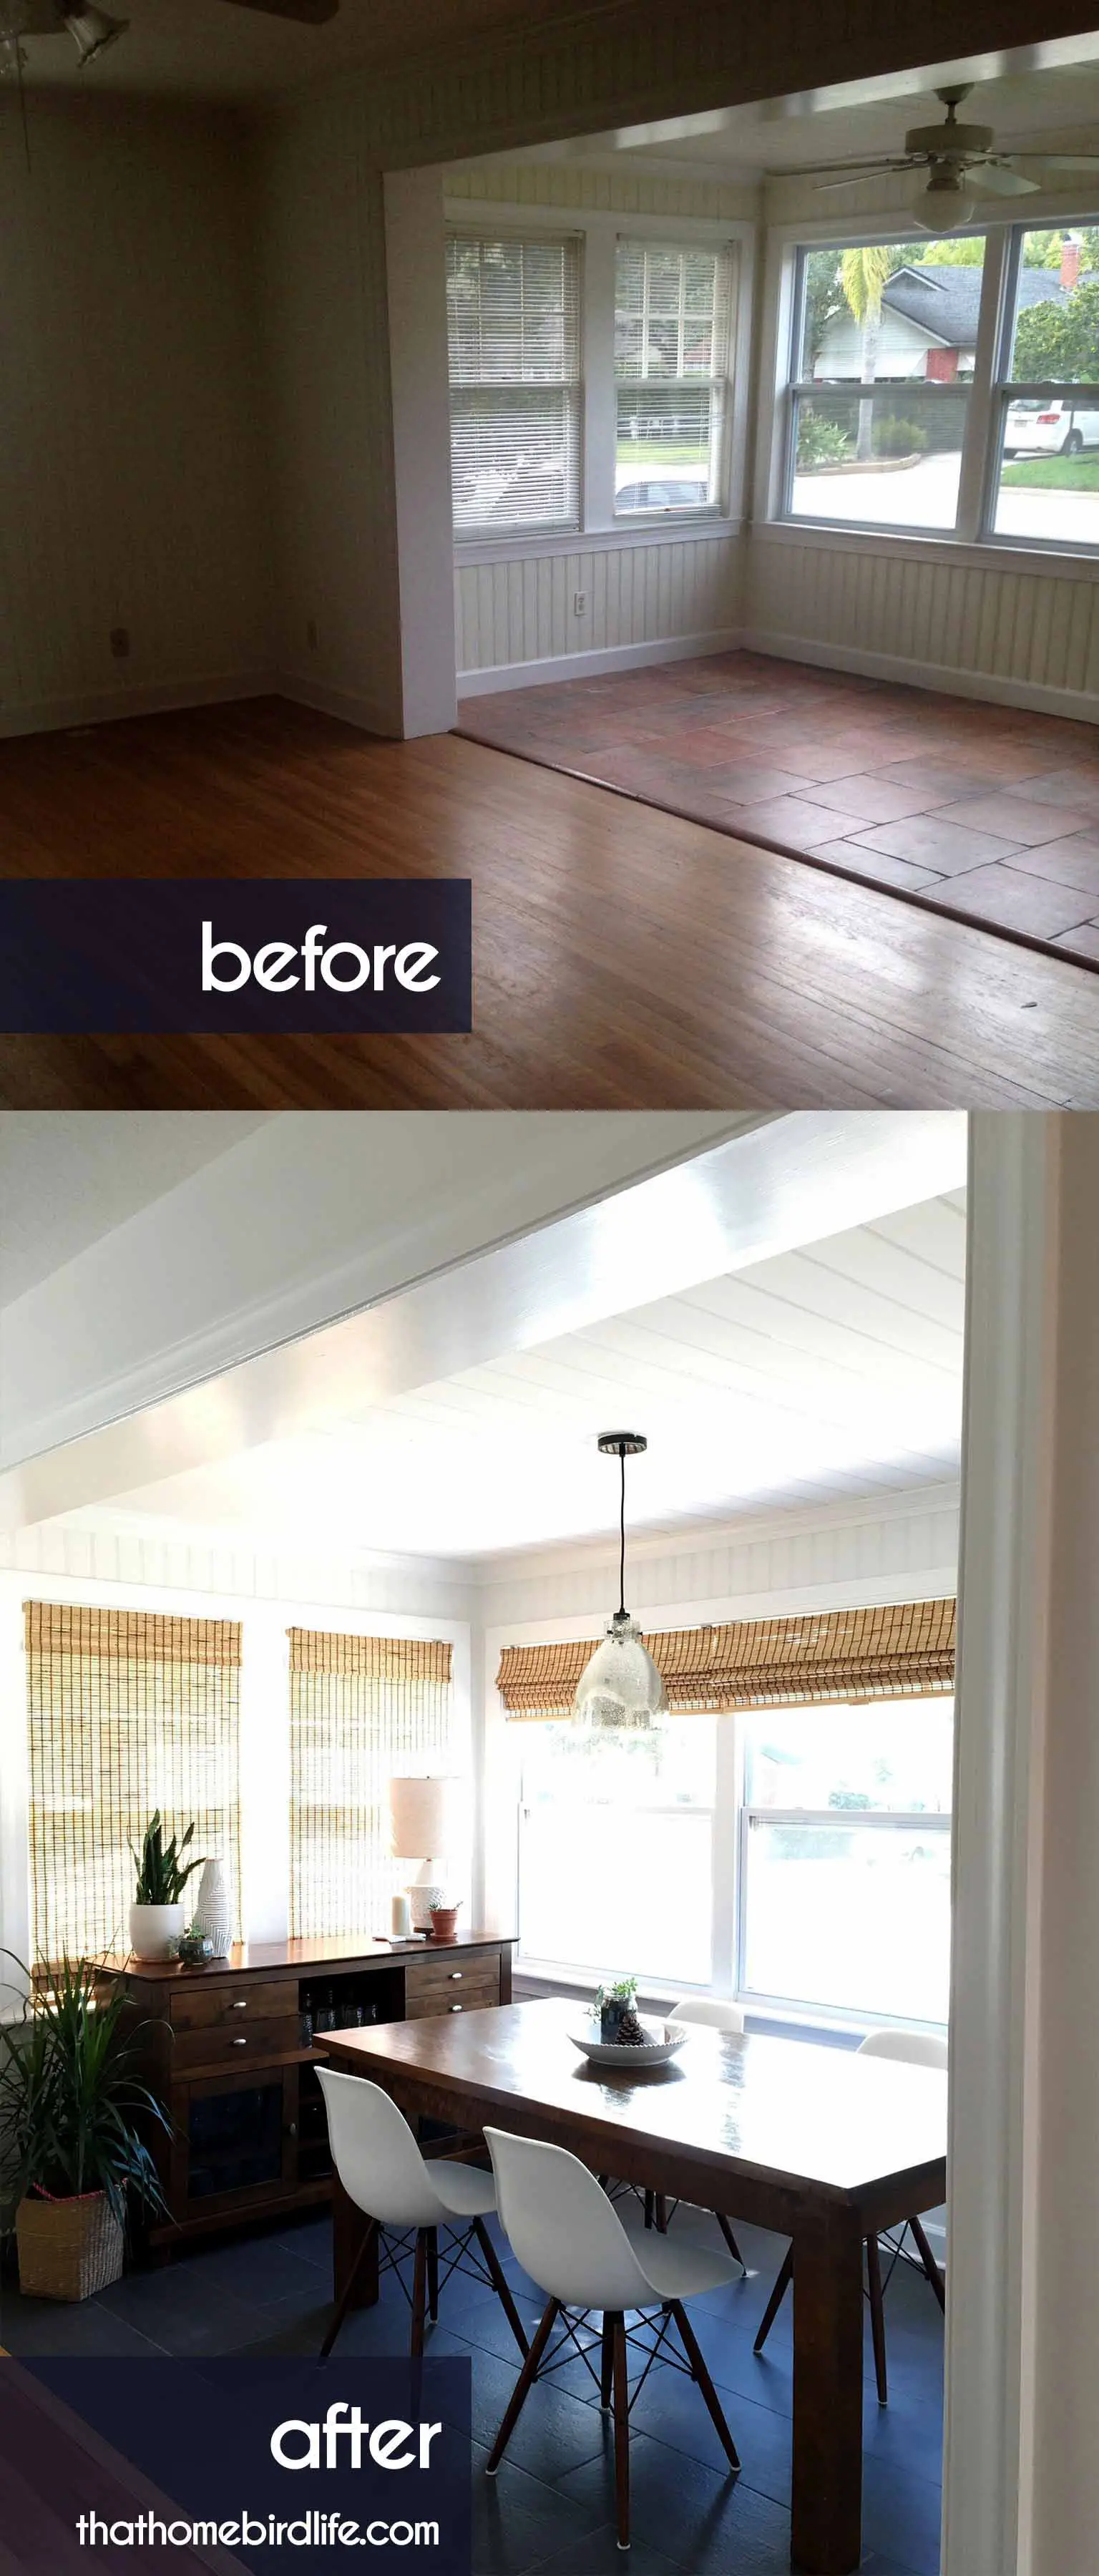 Dining room before and after - That Homebird Life Blog